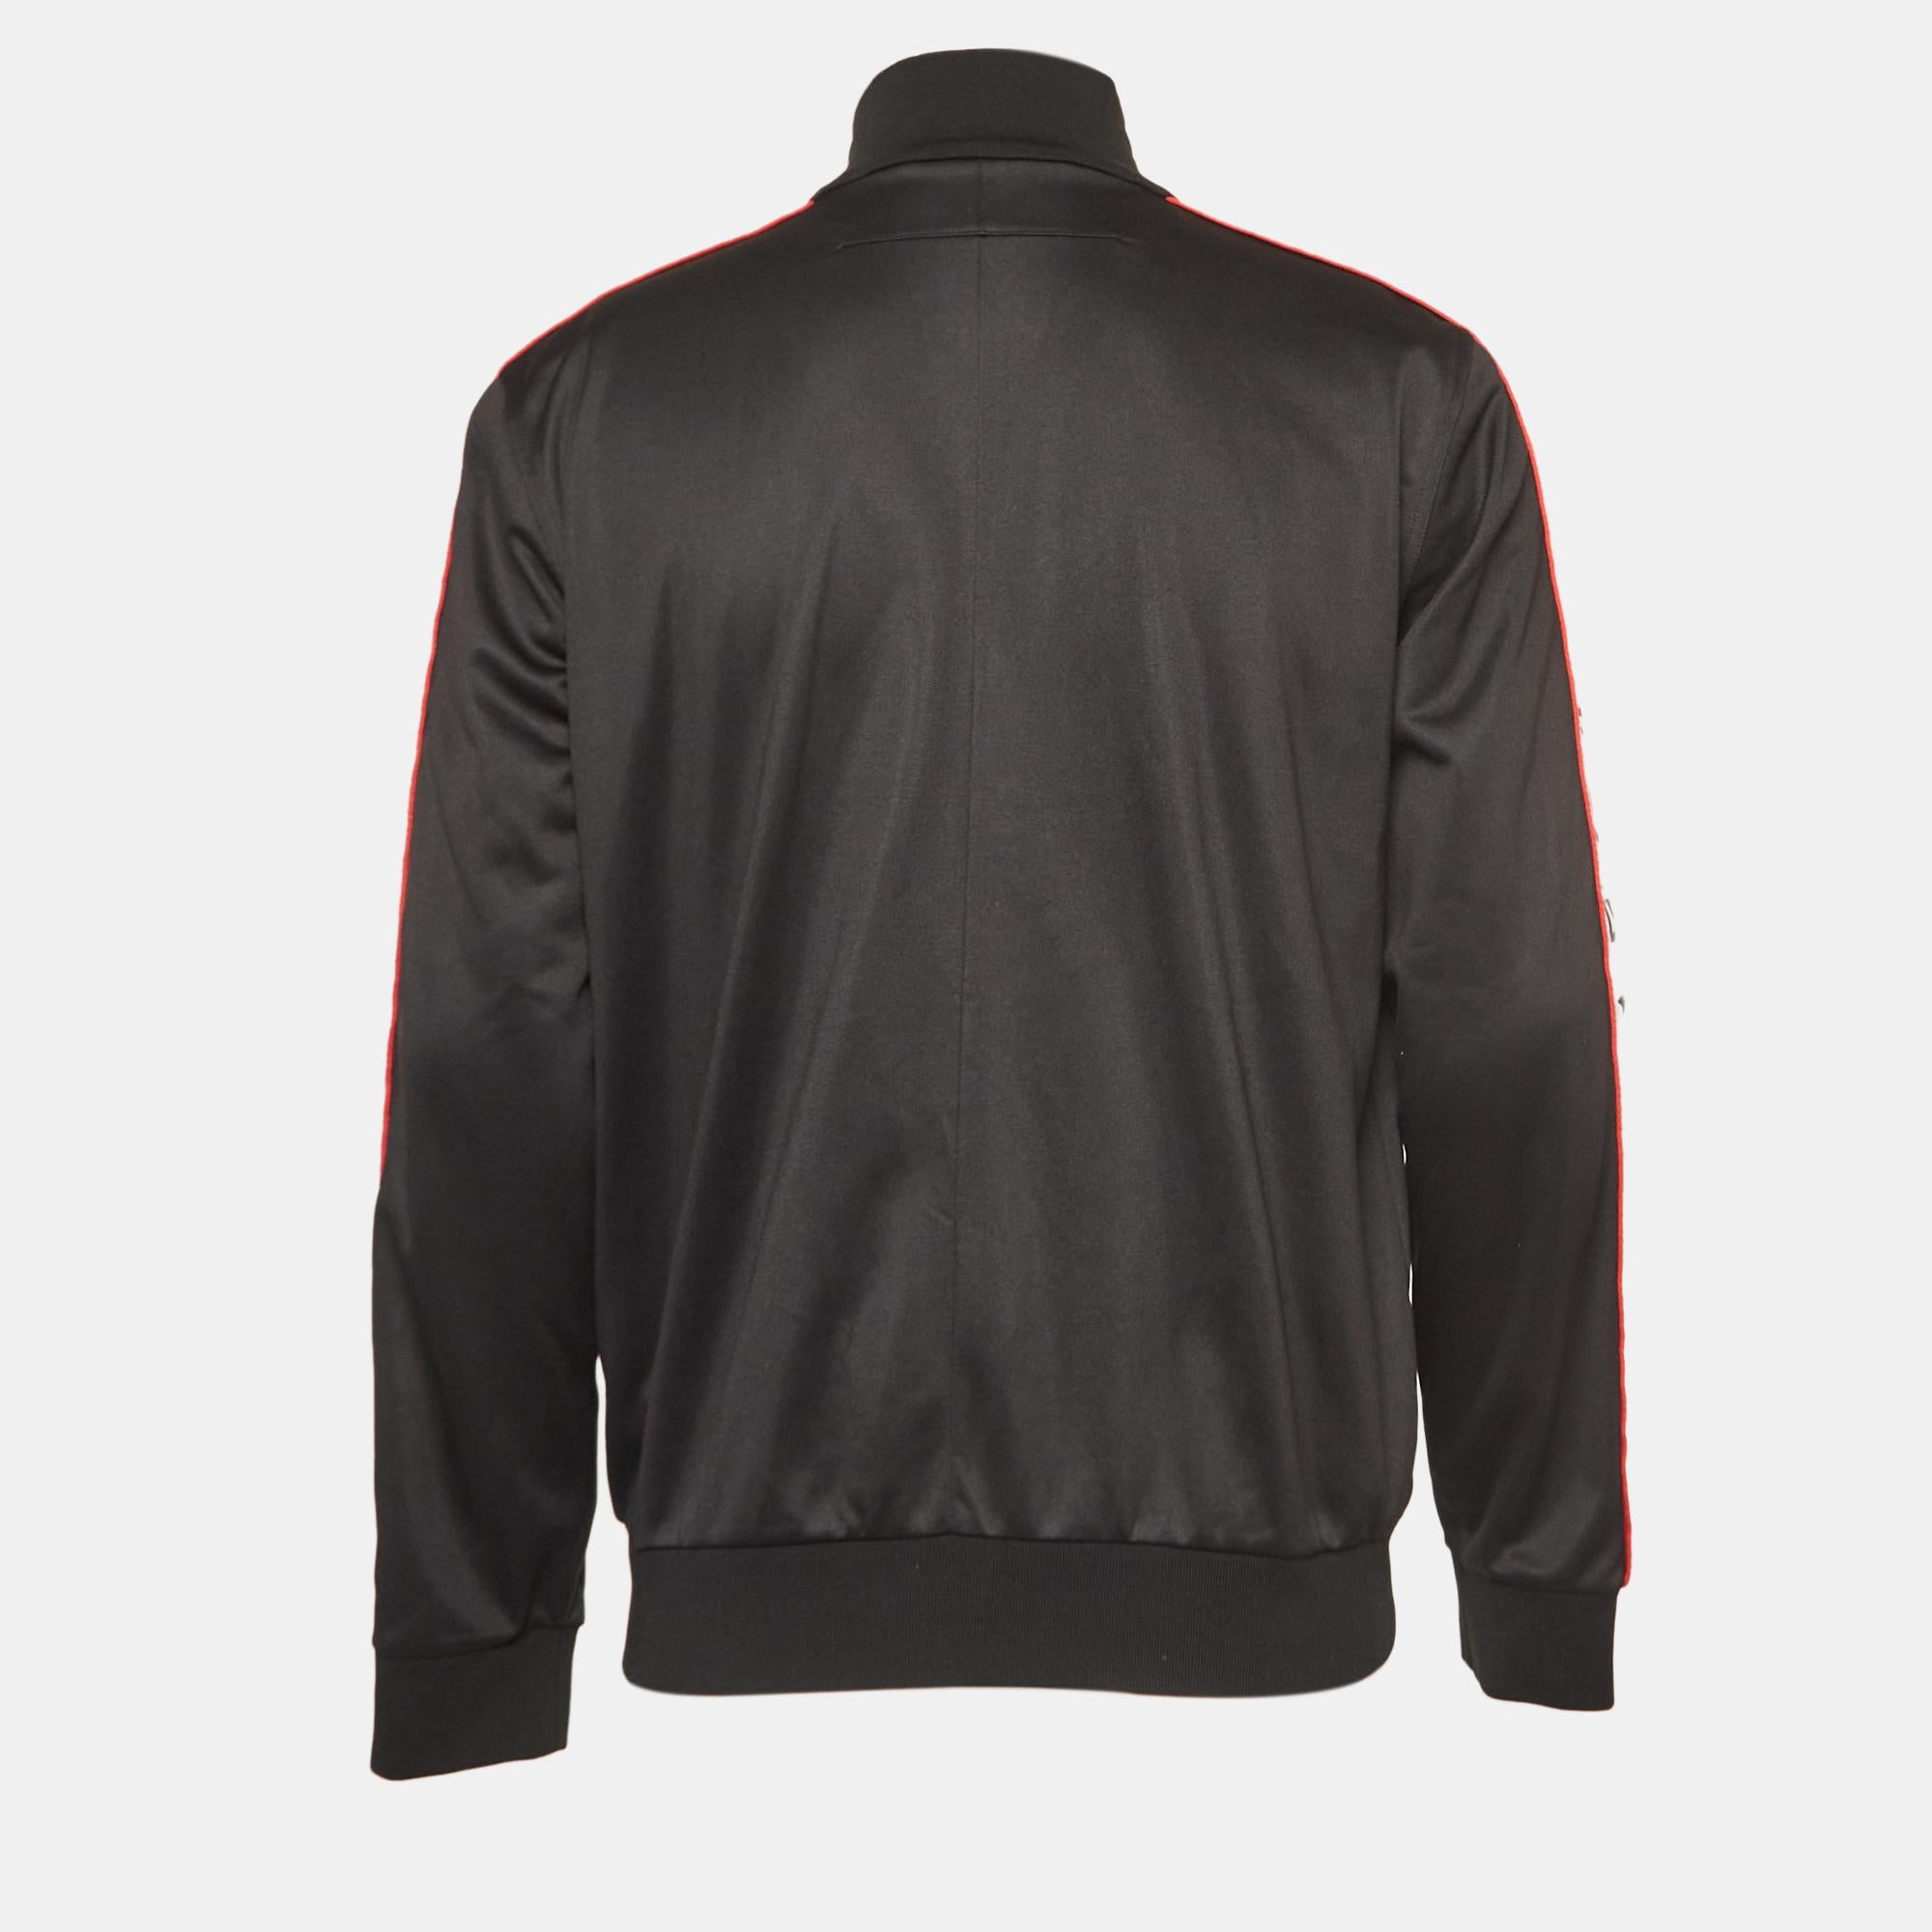 Minimal design and quality come together in this track jacket from Givenchy. Enhanced with logo tape detailing, this black-hued jersey jacket for men is a 'casual style' must-have.

